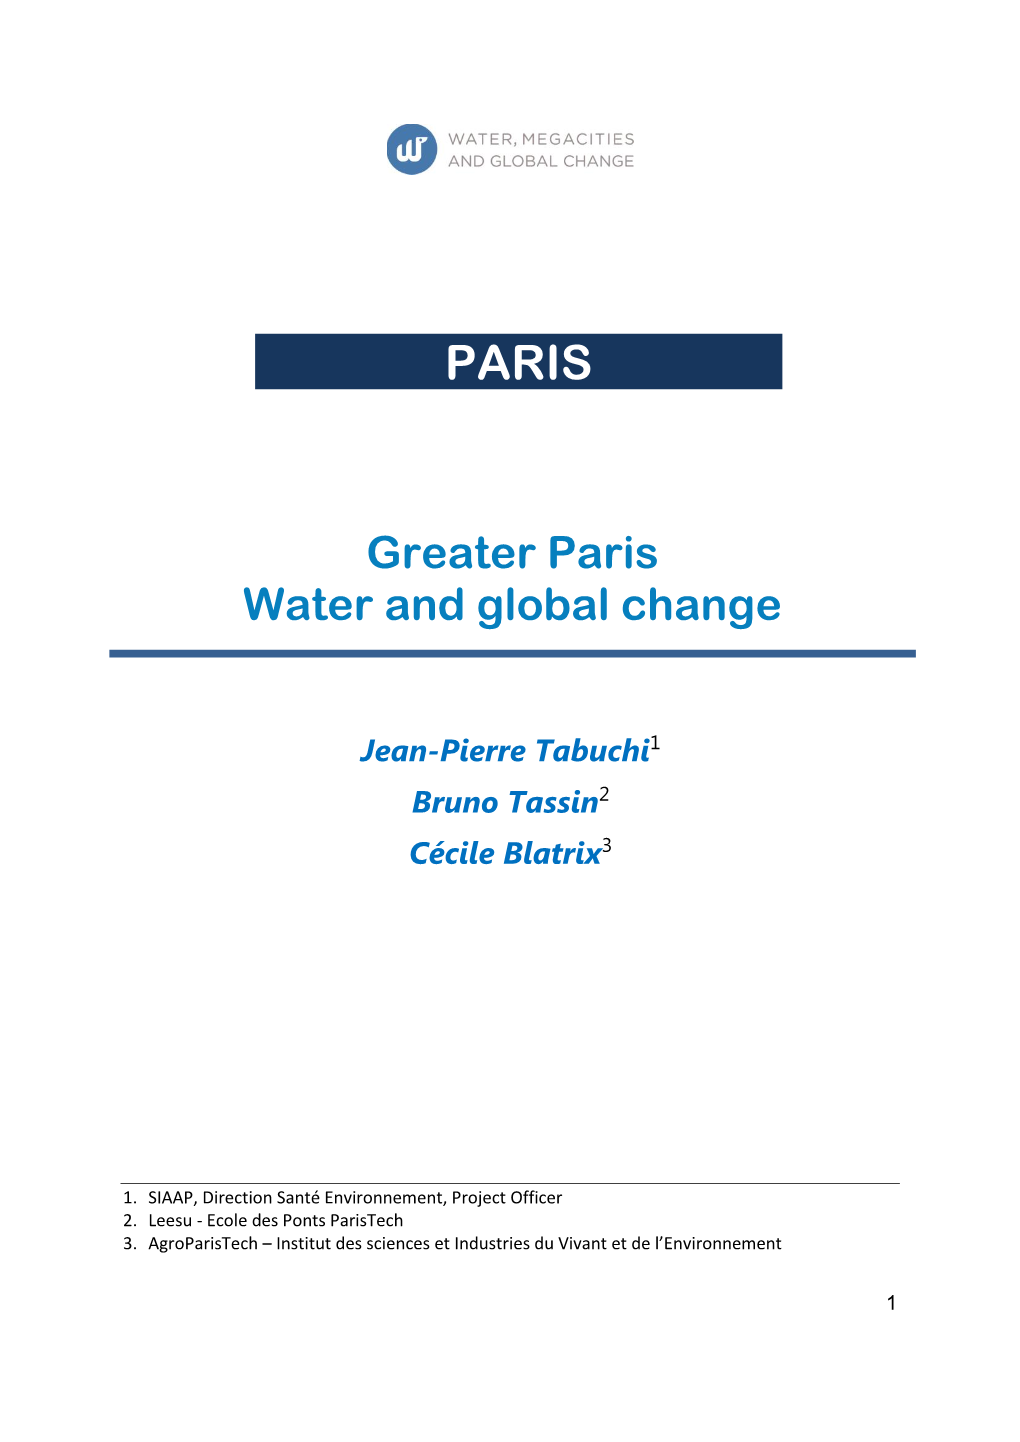 Greater Paris Water and Global Change